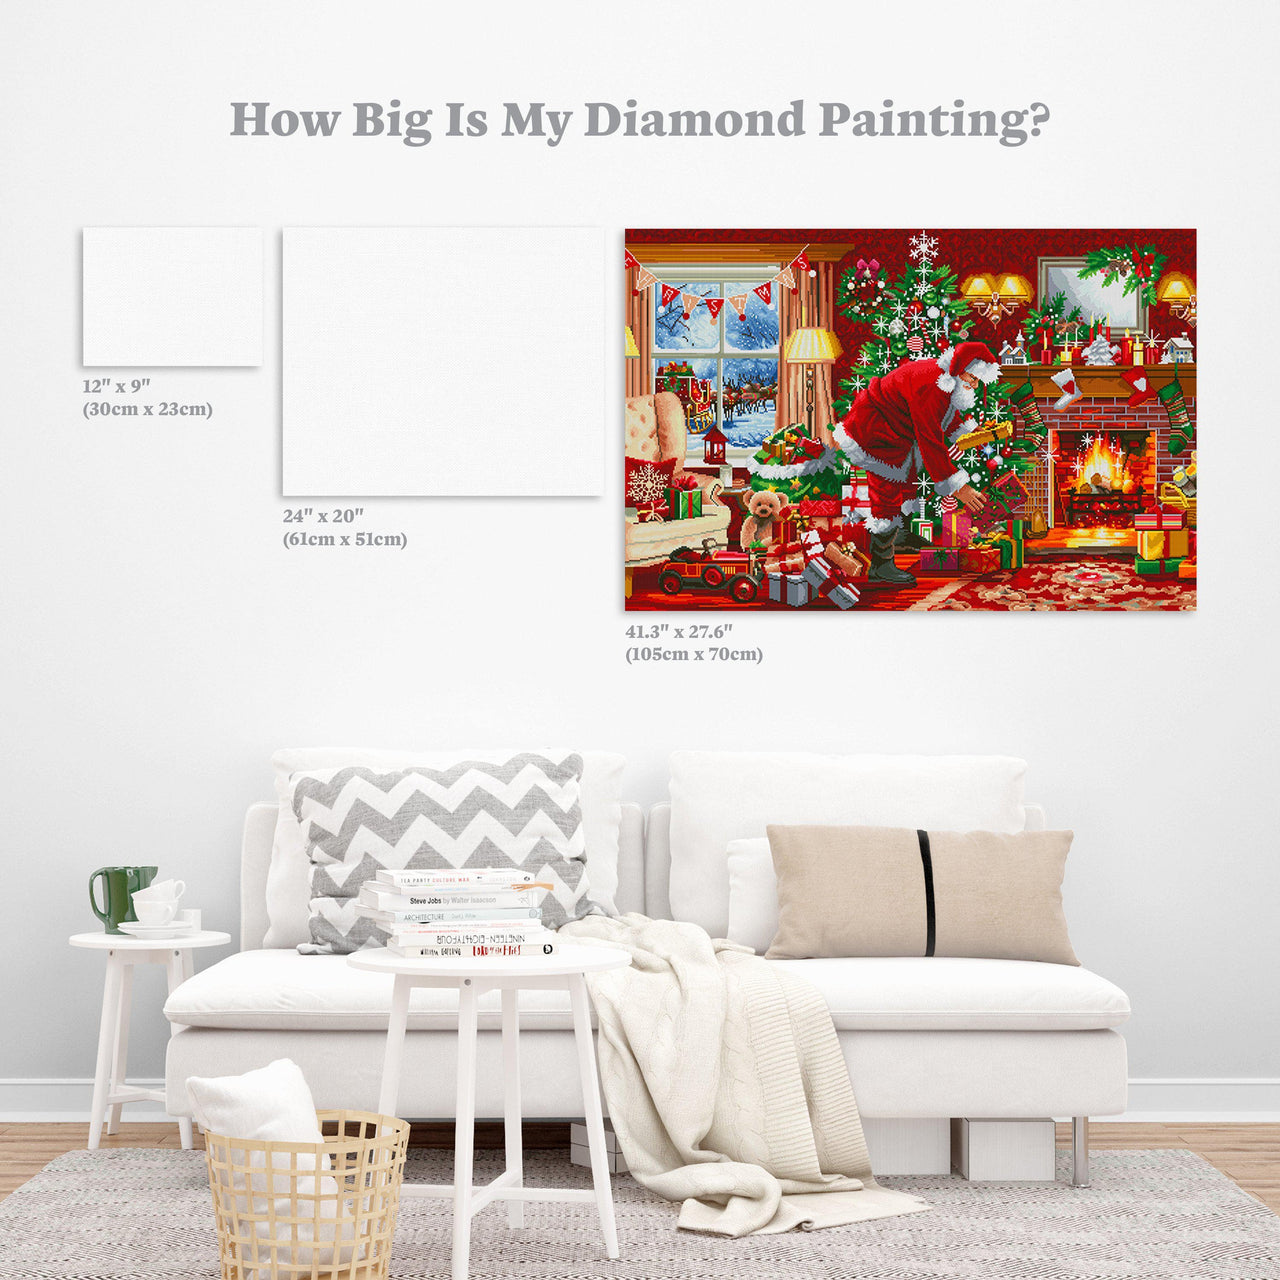 Diamond Painting Christmas Morning 41.3" x 27.6″ (105cm x 70cm) / Square with 63 Colors including 2 ABs